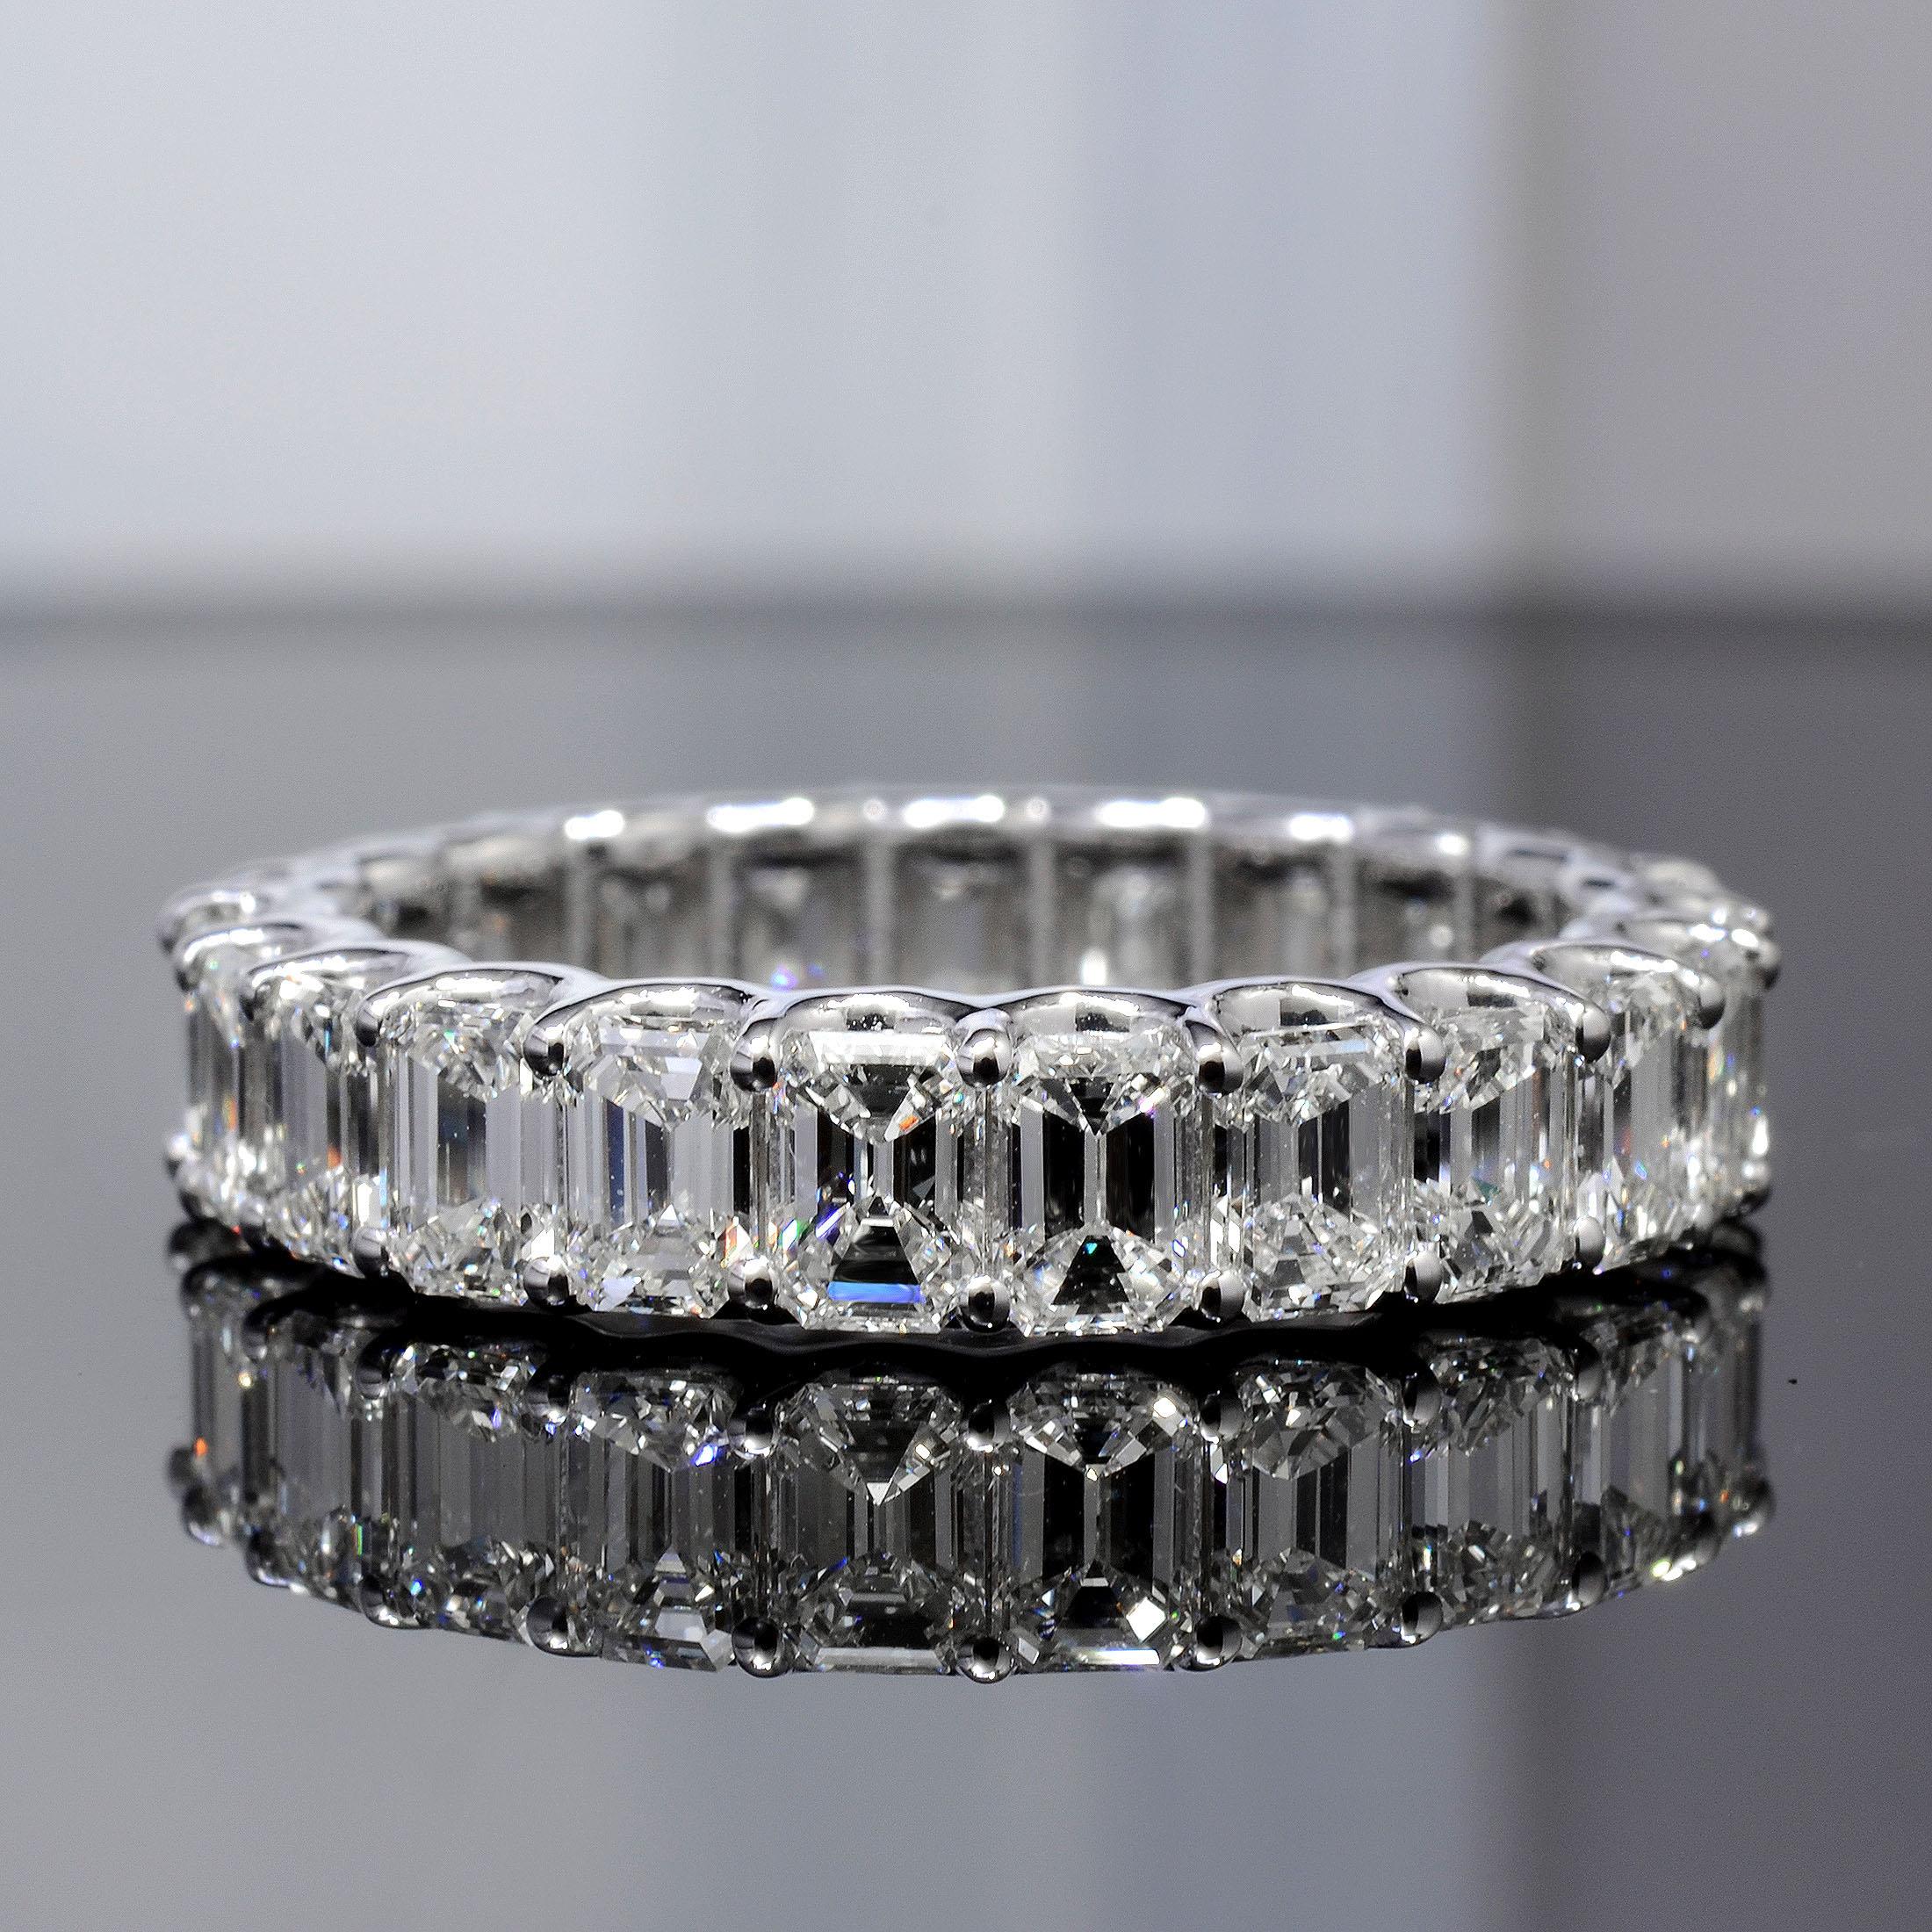 For Sale:  6 Carats Emerald Cut Eternity Band Shared Prongs F-G Color VS1 Clarity 18k Gold 5